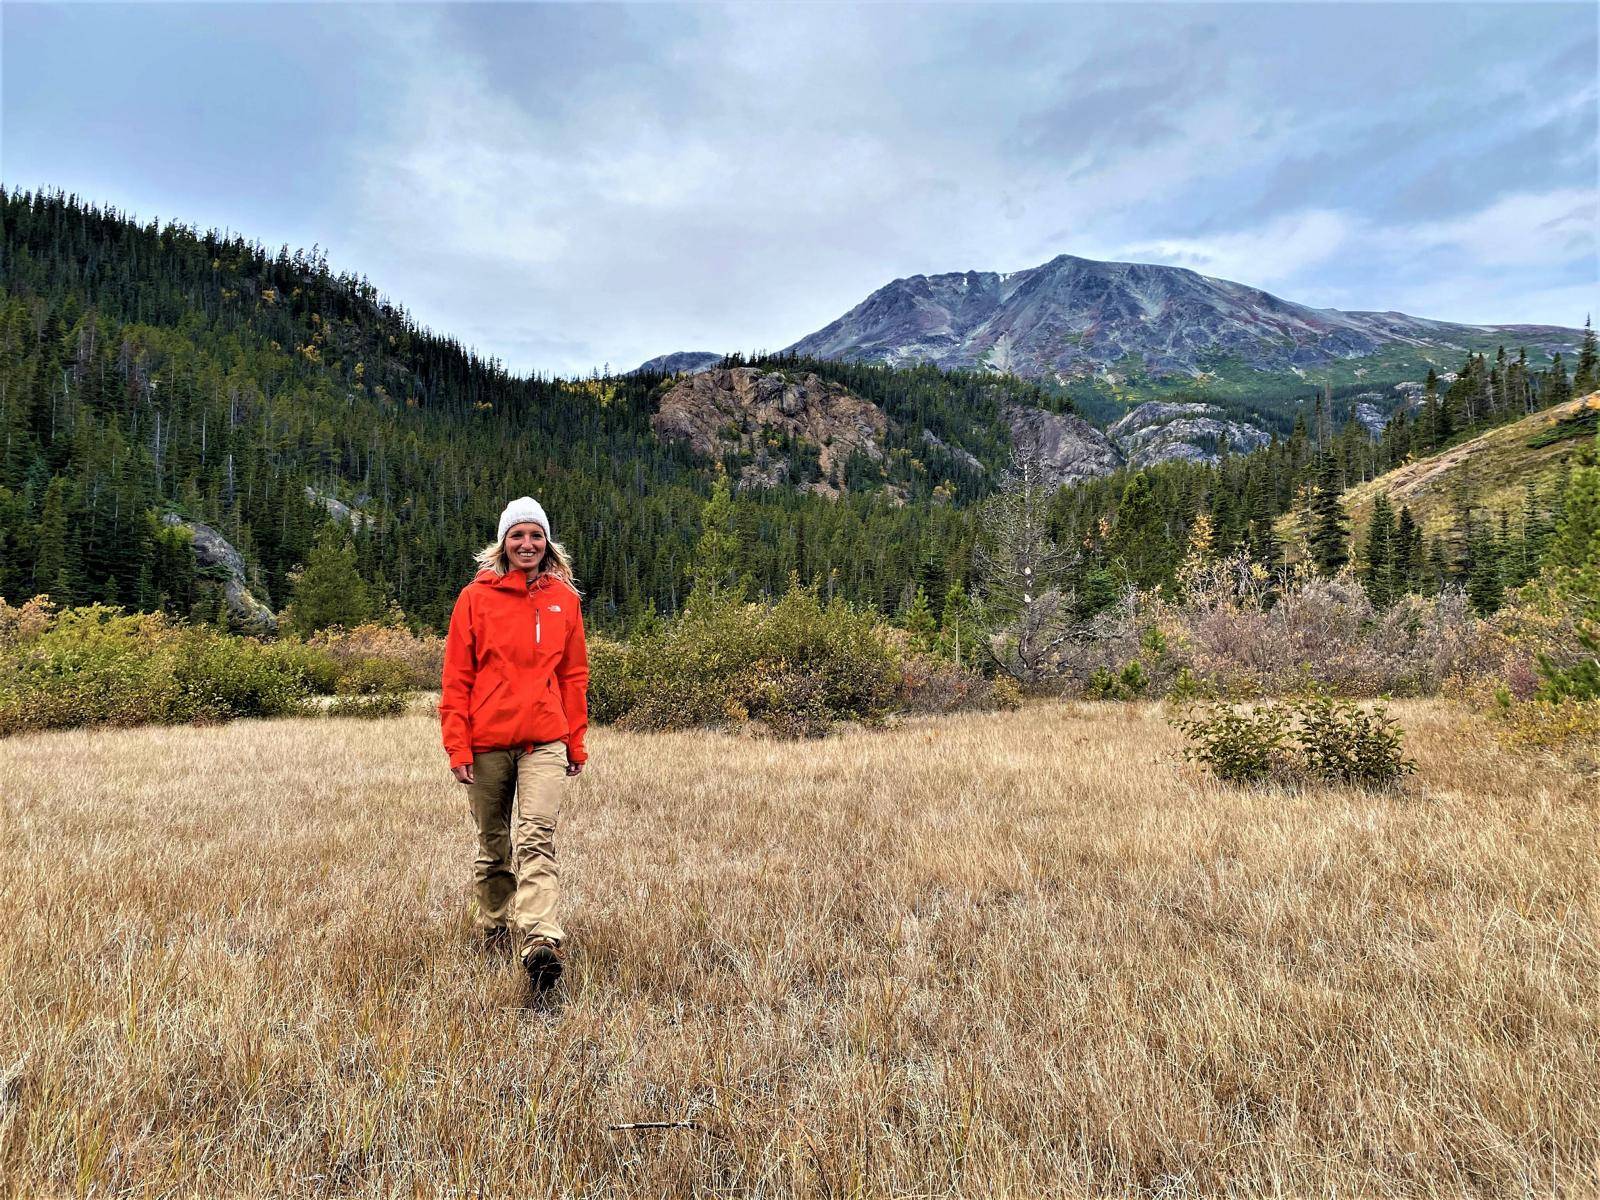 A woman hiking towards the camera on a meadow with trees and mountains in the background